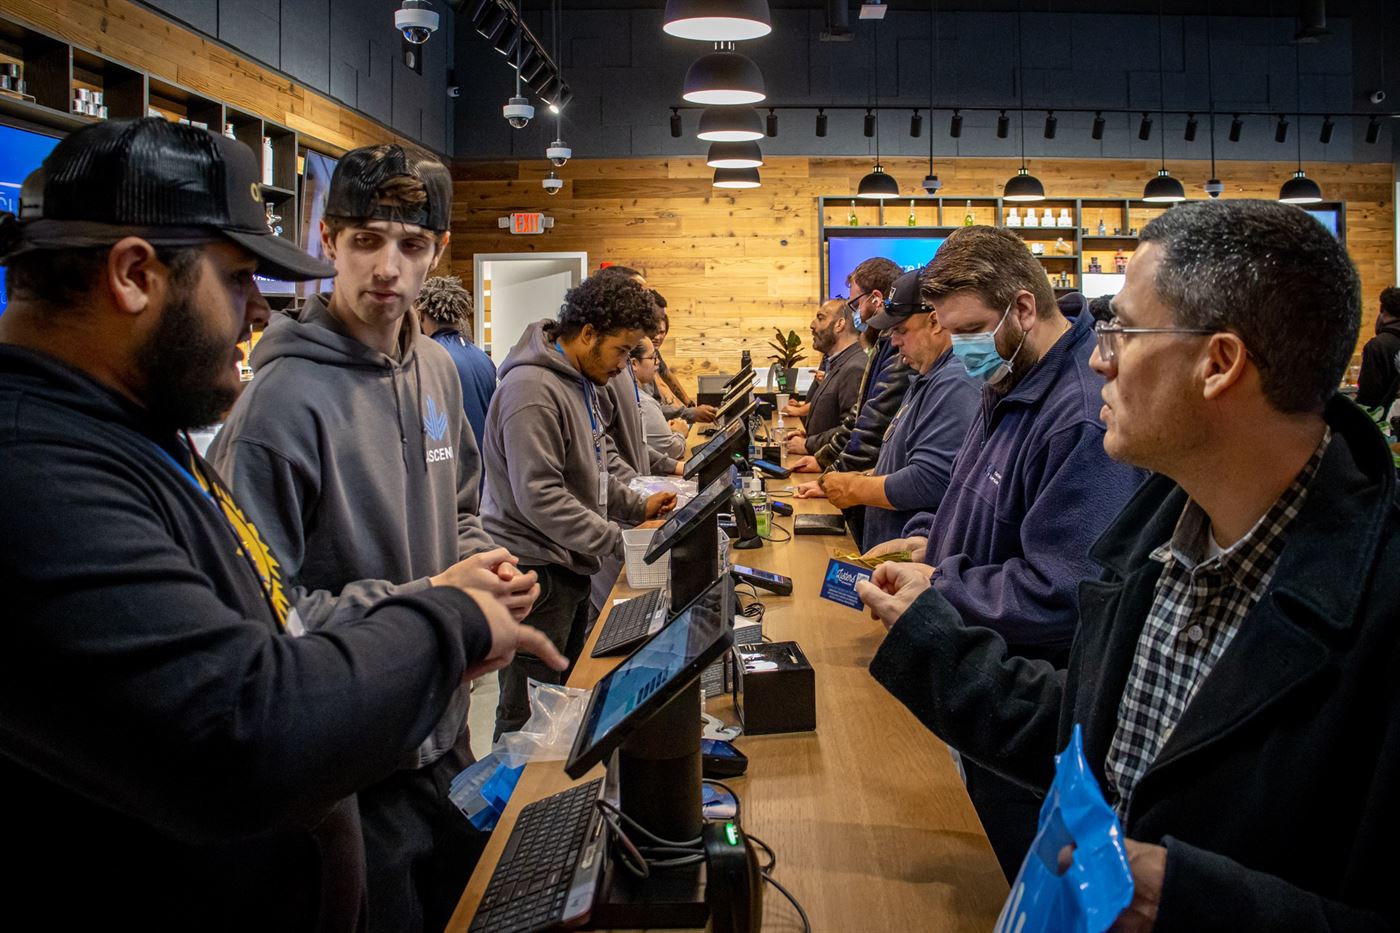 A line of costumers wrap around the multiple checkout desks inside the dispensary Ascend in Rochelle Park. John LaRosa | The Montclarion